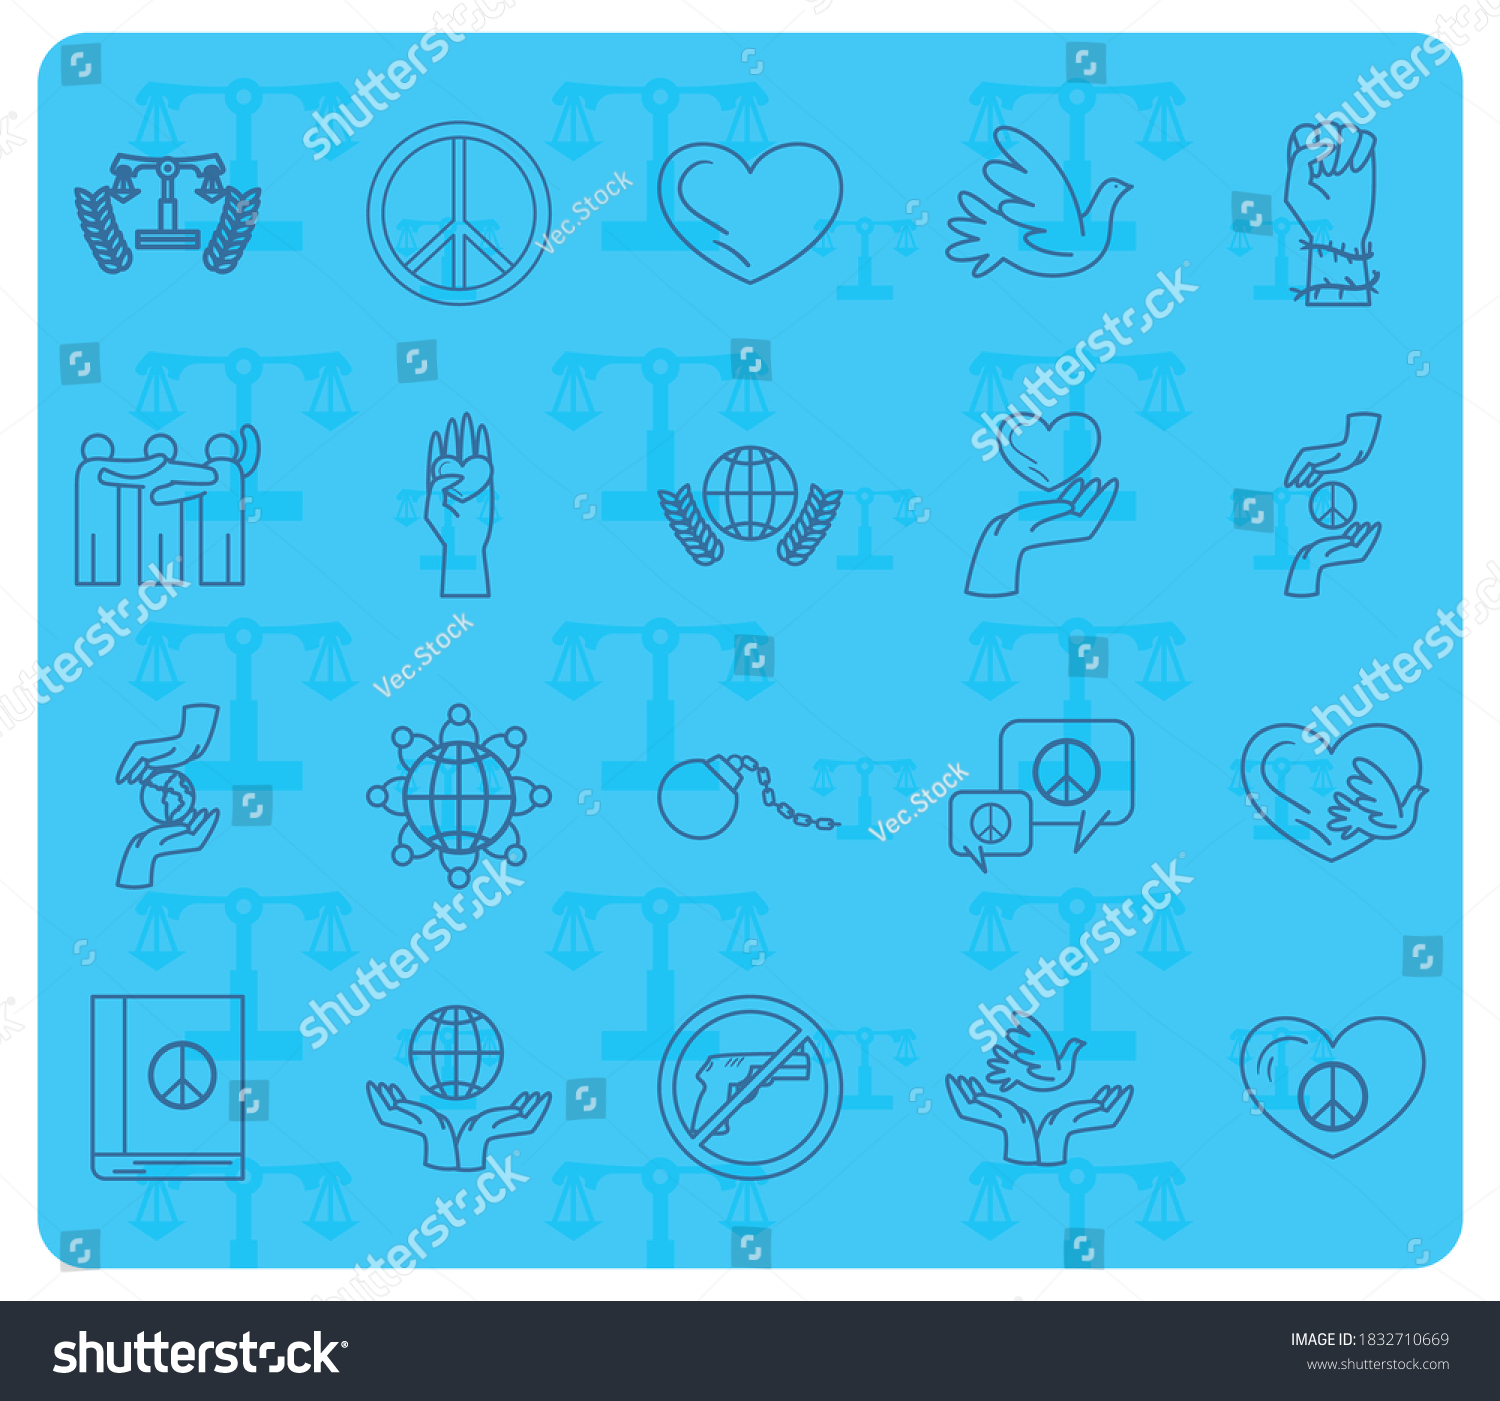 Human Rights Line Style Icon Collection Stock Vector Royalty Free